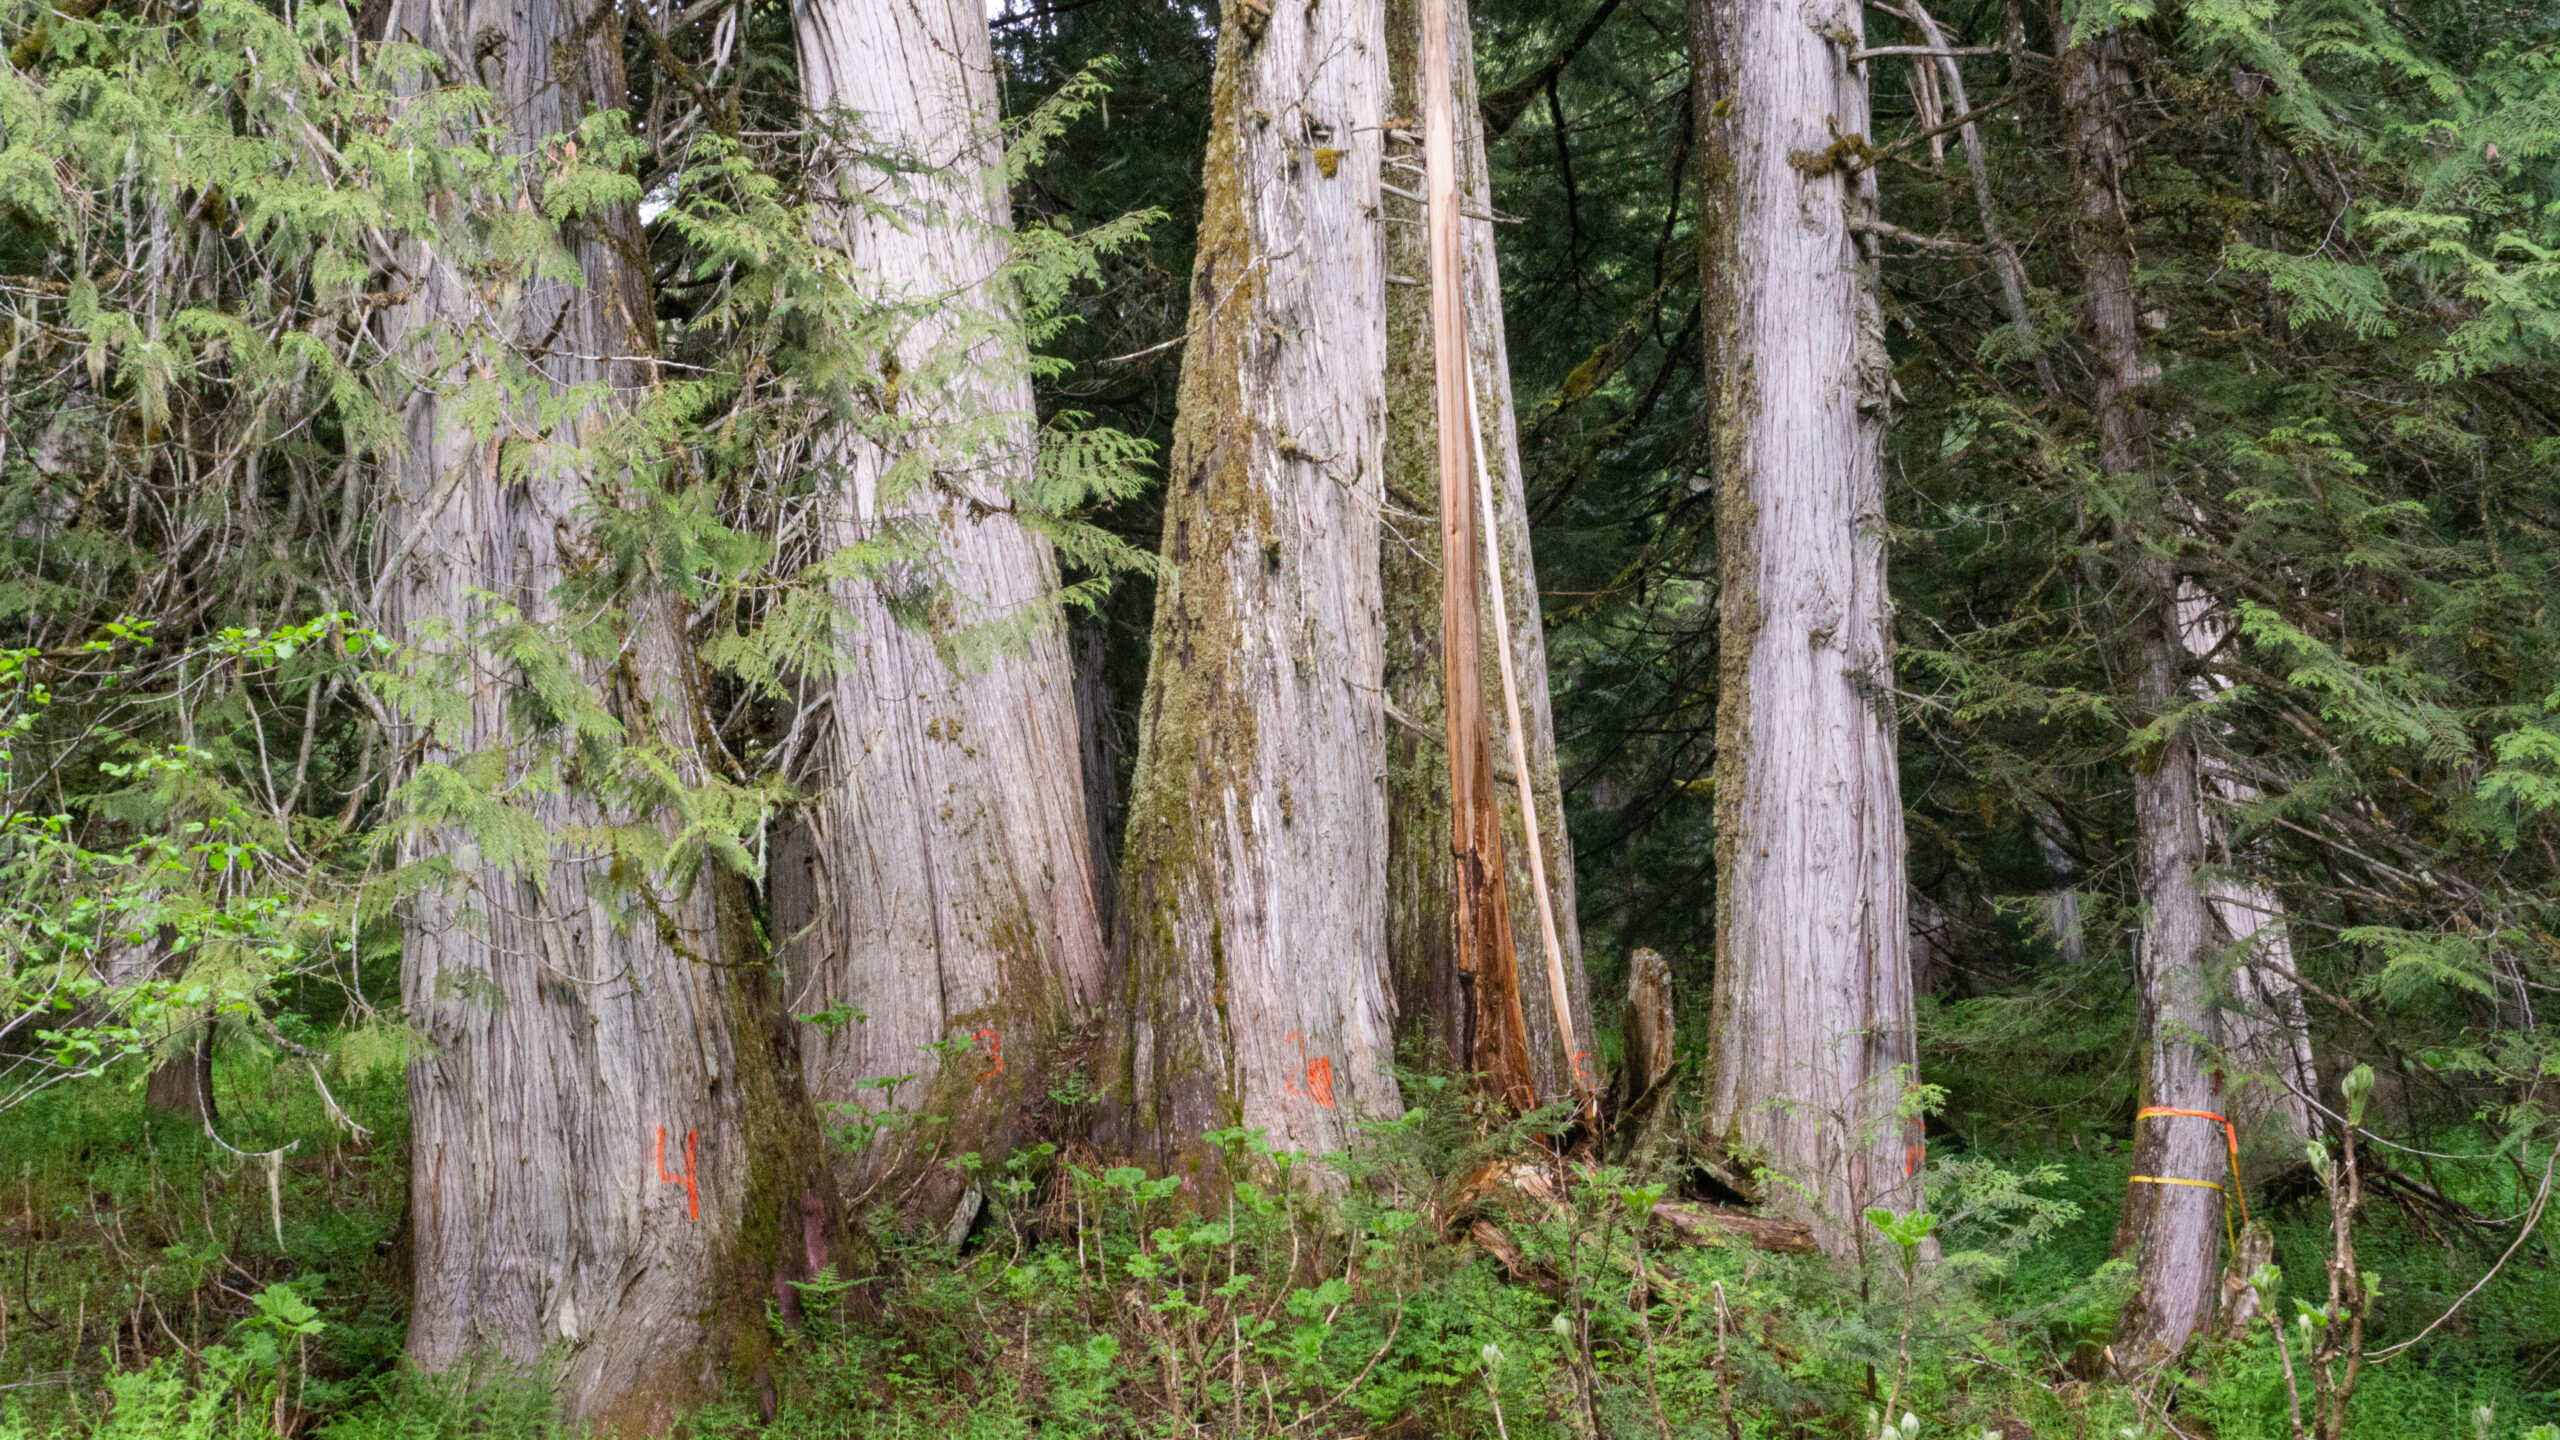 Old-growth cedars marked for measurement in the Seymour River watershed, northwest of Revelstoke, B.C. The forest contains lichens